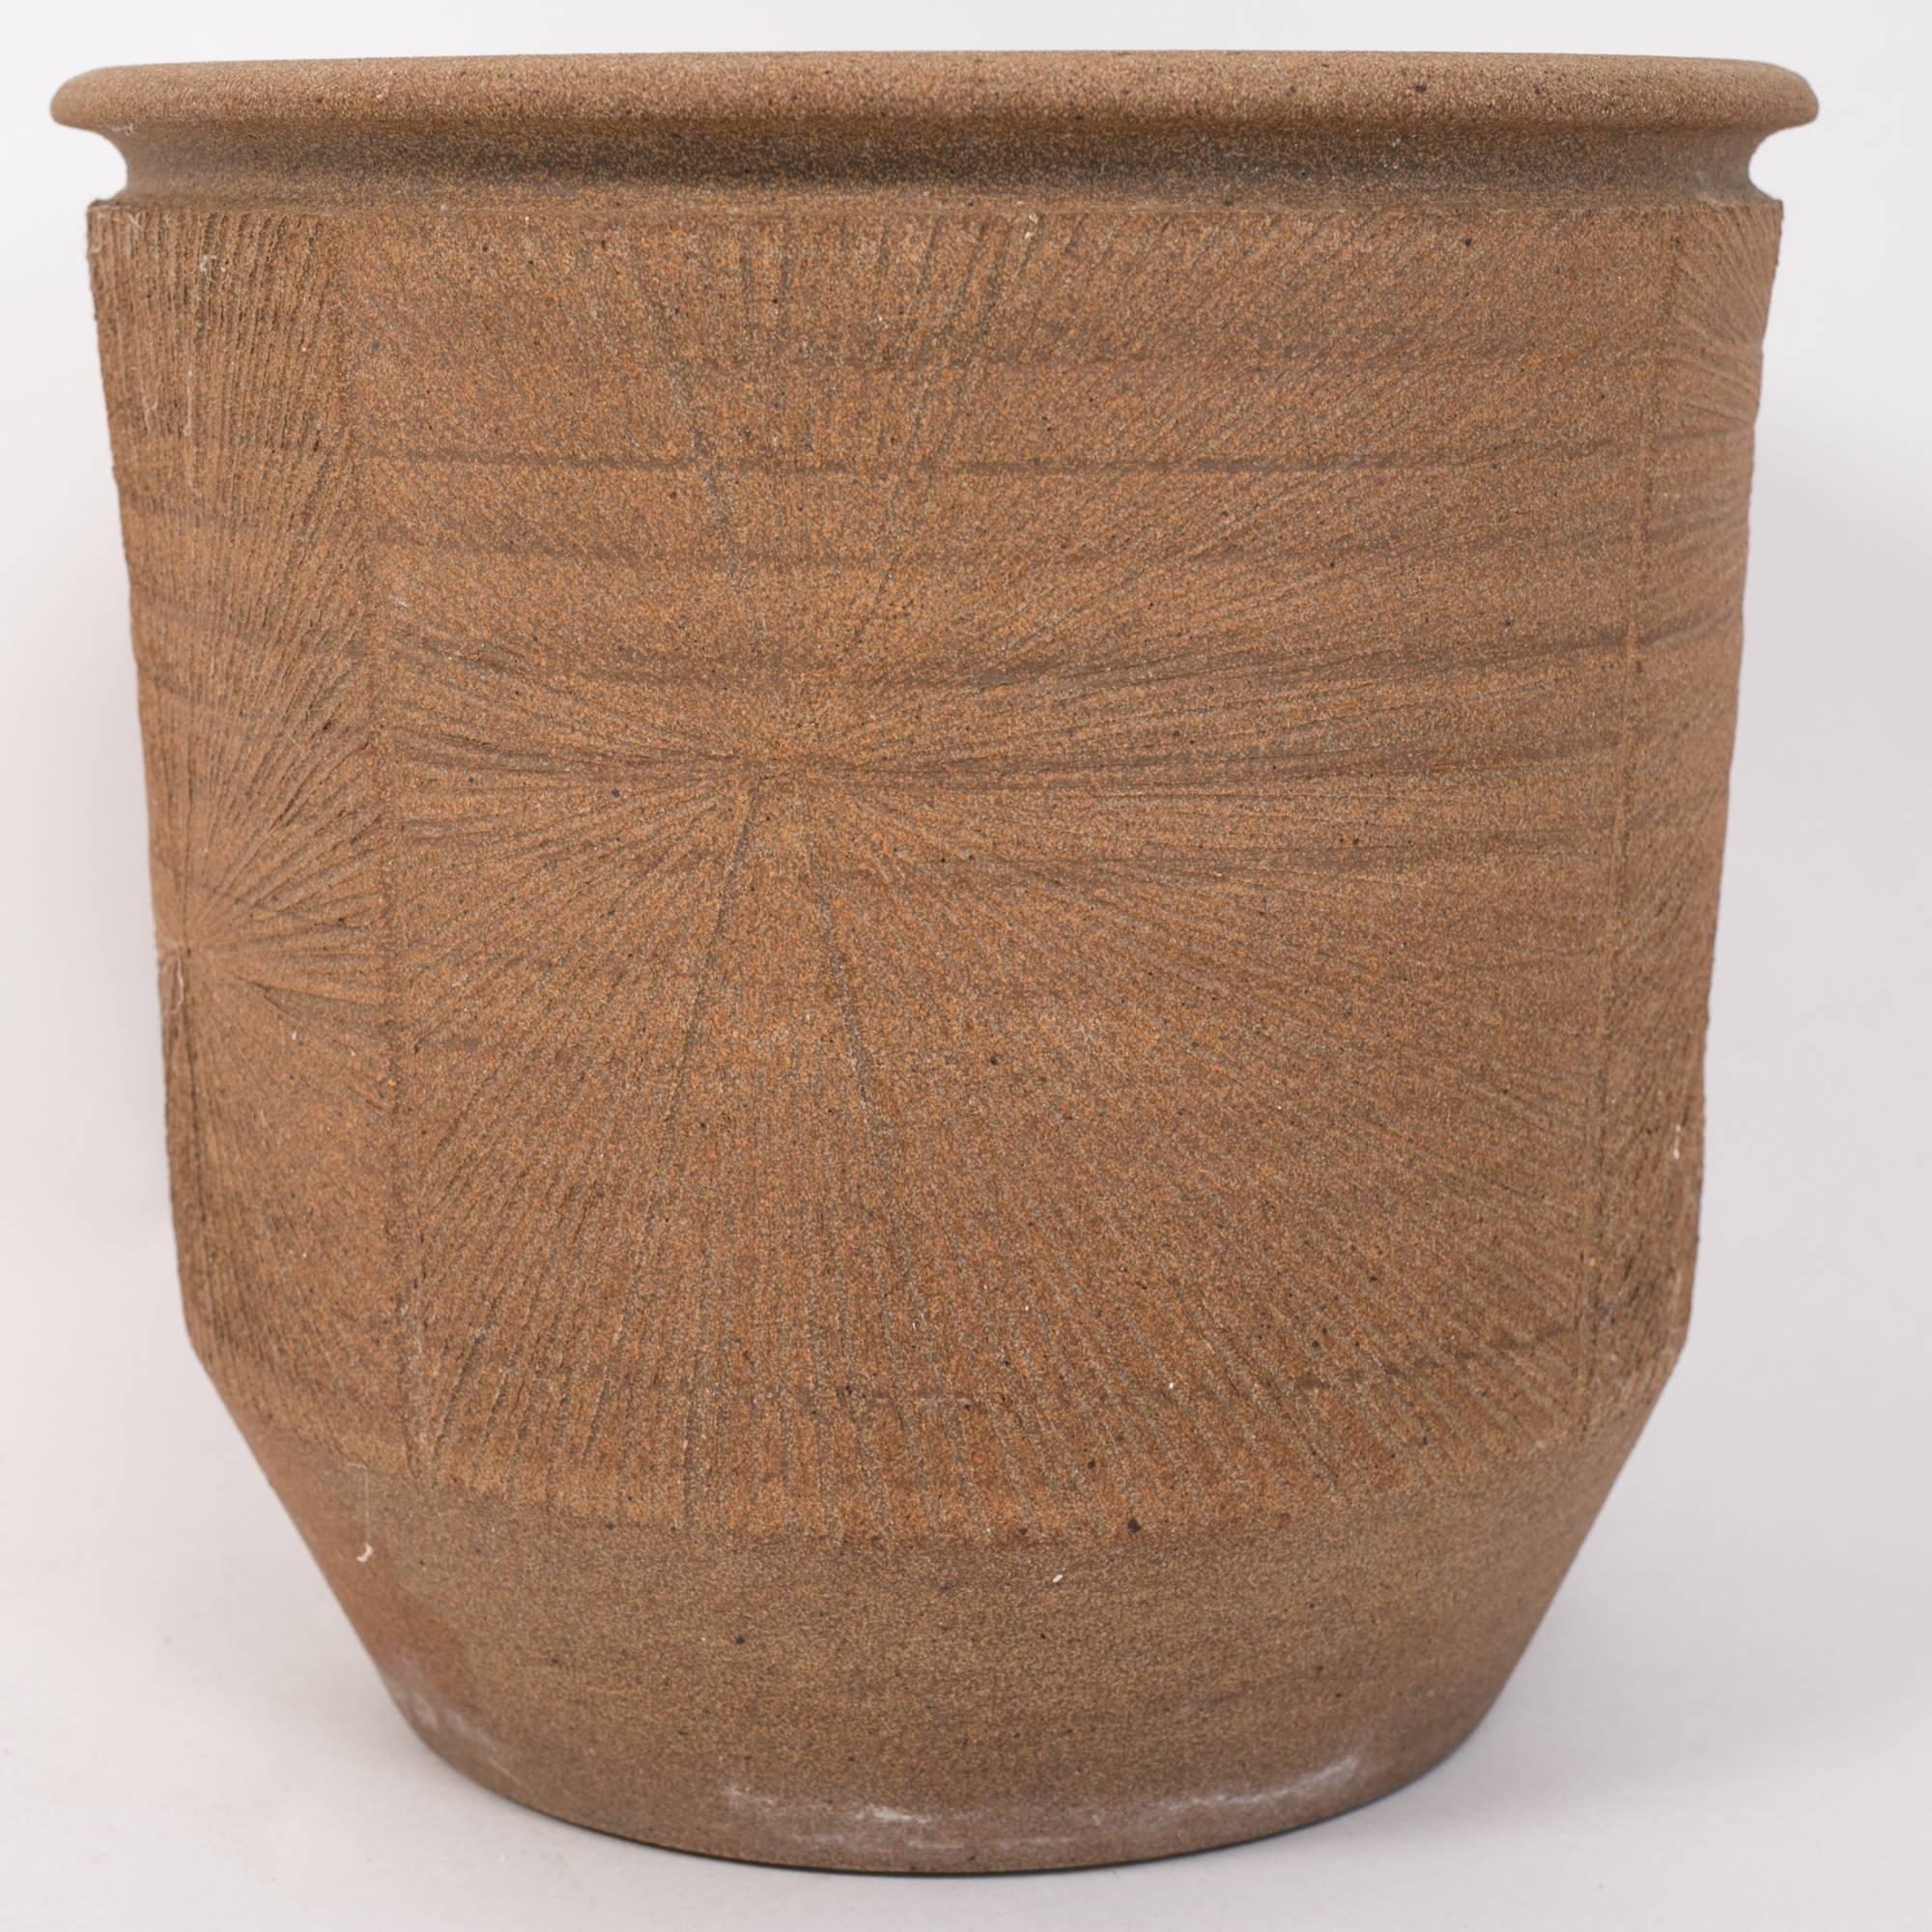 A 1970s handmade Studio Pottery planter by California ceramics artist Robert Maxwell. This example has a notched lip and cylindrical shape. It is hand incised with a Maxwell signature “sunburst” design. The interior of the planter is glazed and a